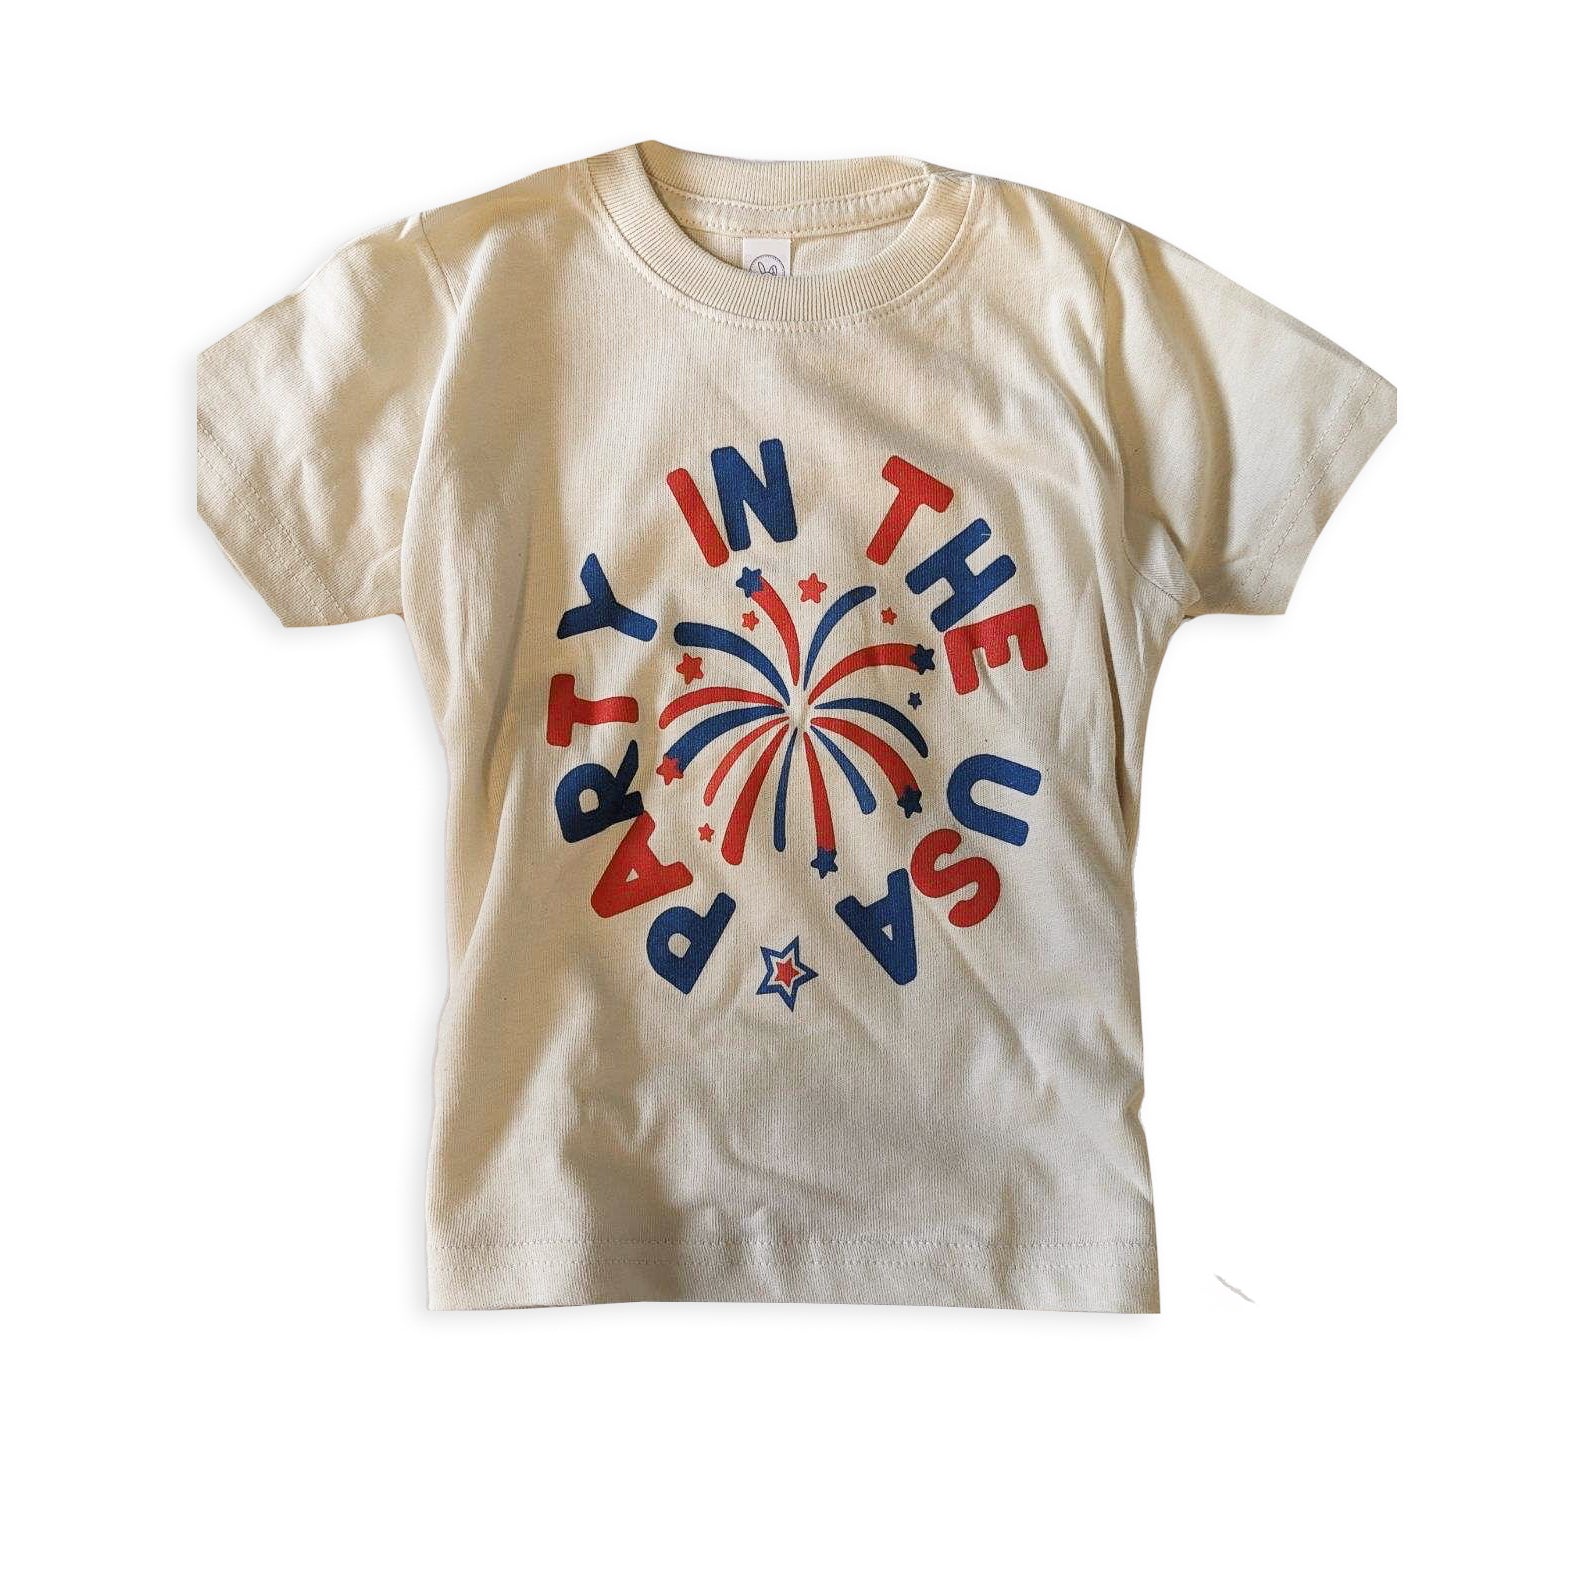 Party In The USA toddler tee